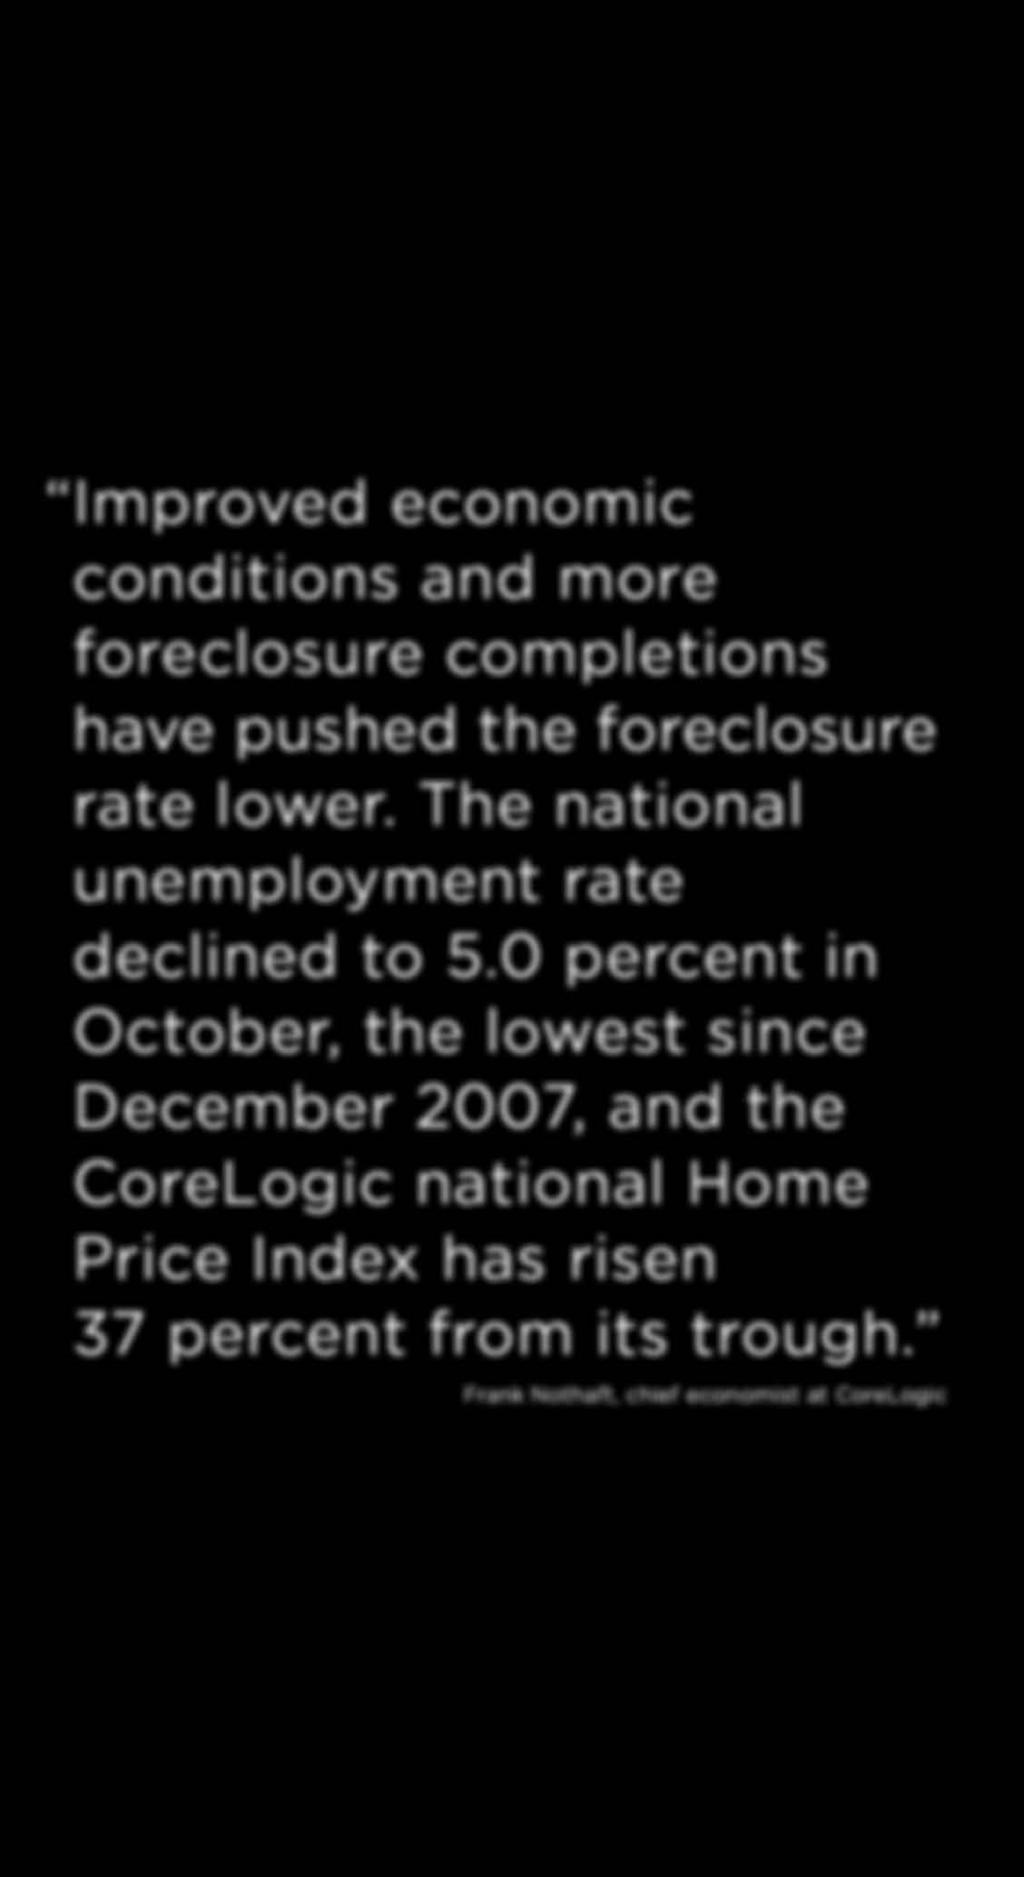 0 percent in October, the lowest since December 2007, and the CoreLogic national Home Price Index has risen 37 percent from its trough.